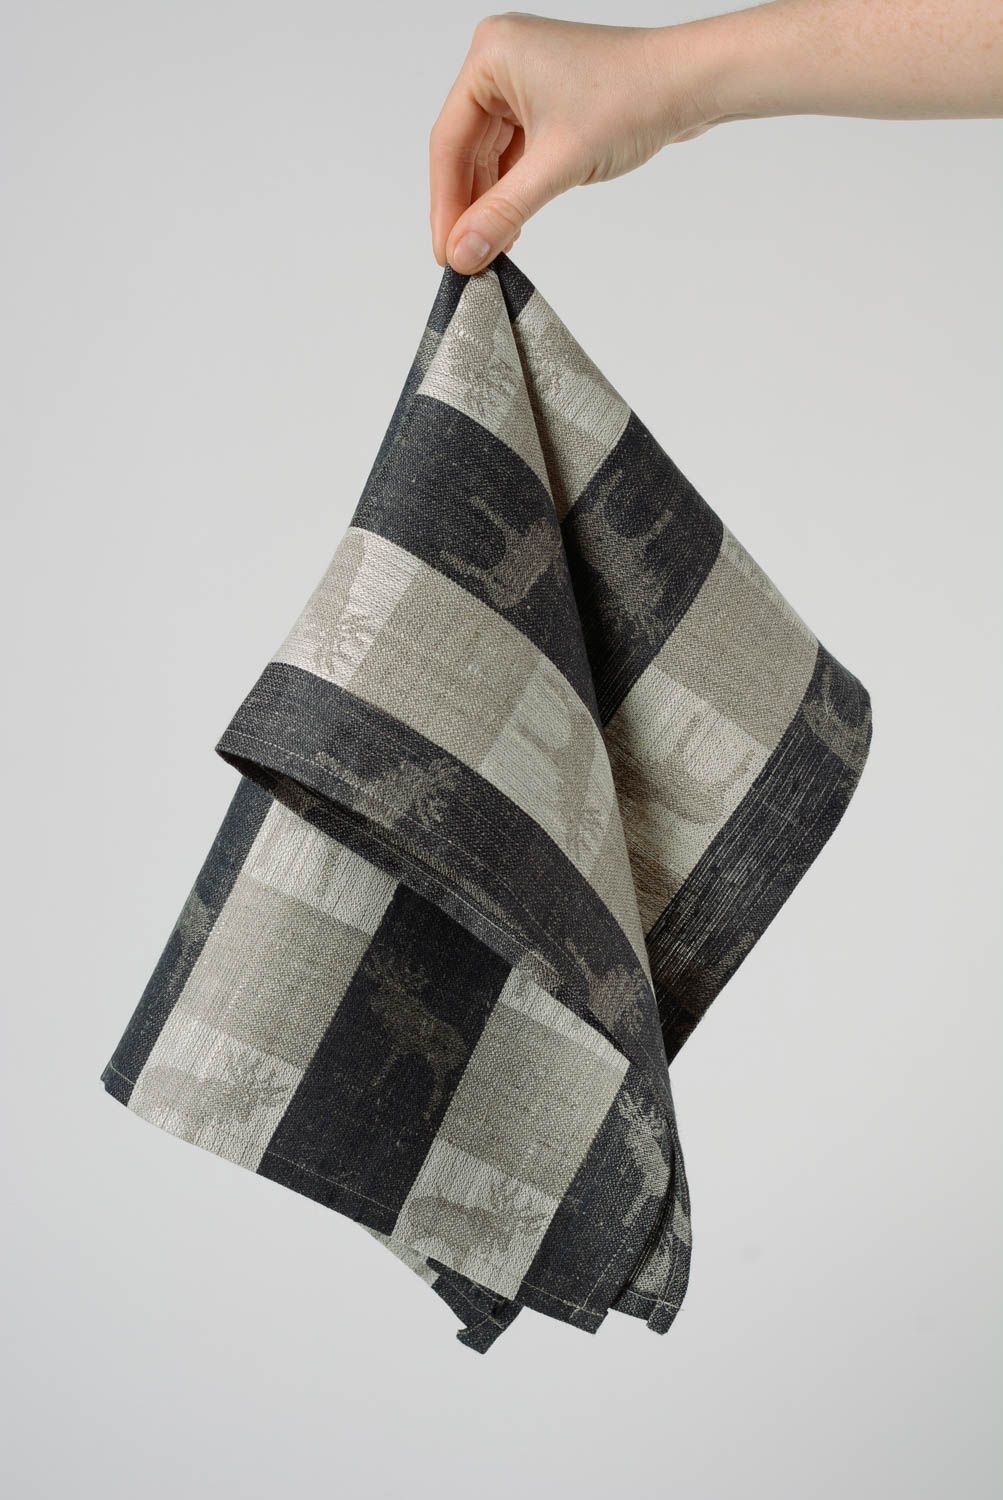 Handmade kitchen towel sewn of gray and black checkered linen fabric with elks photo 4